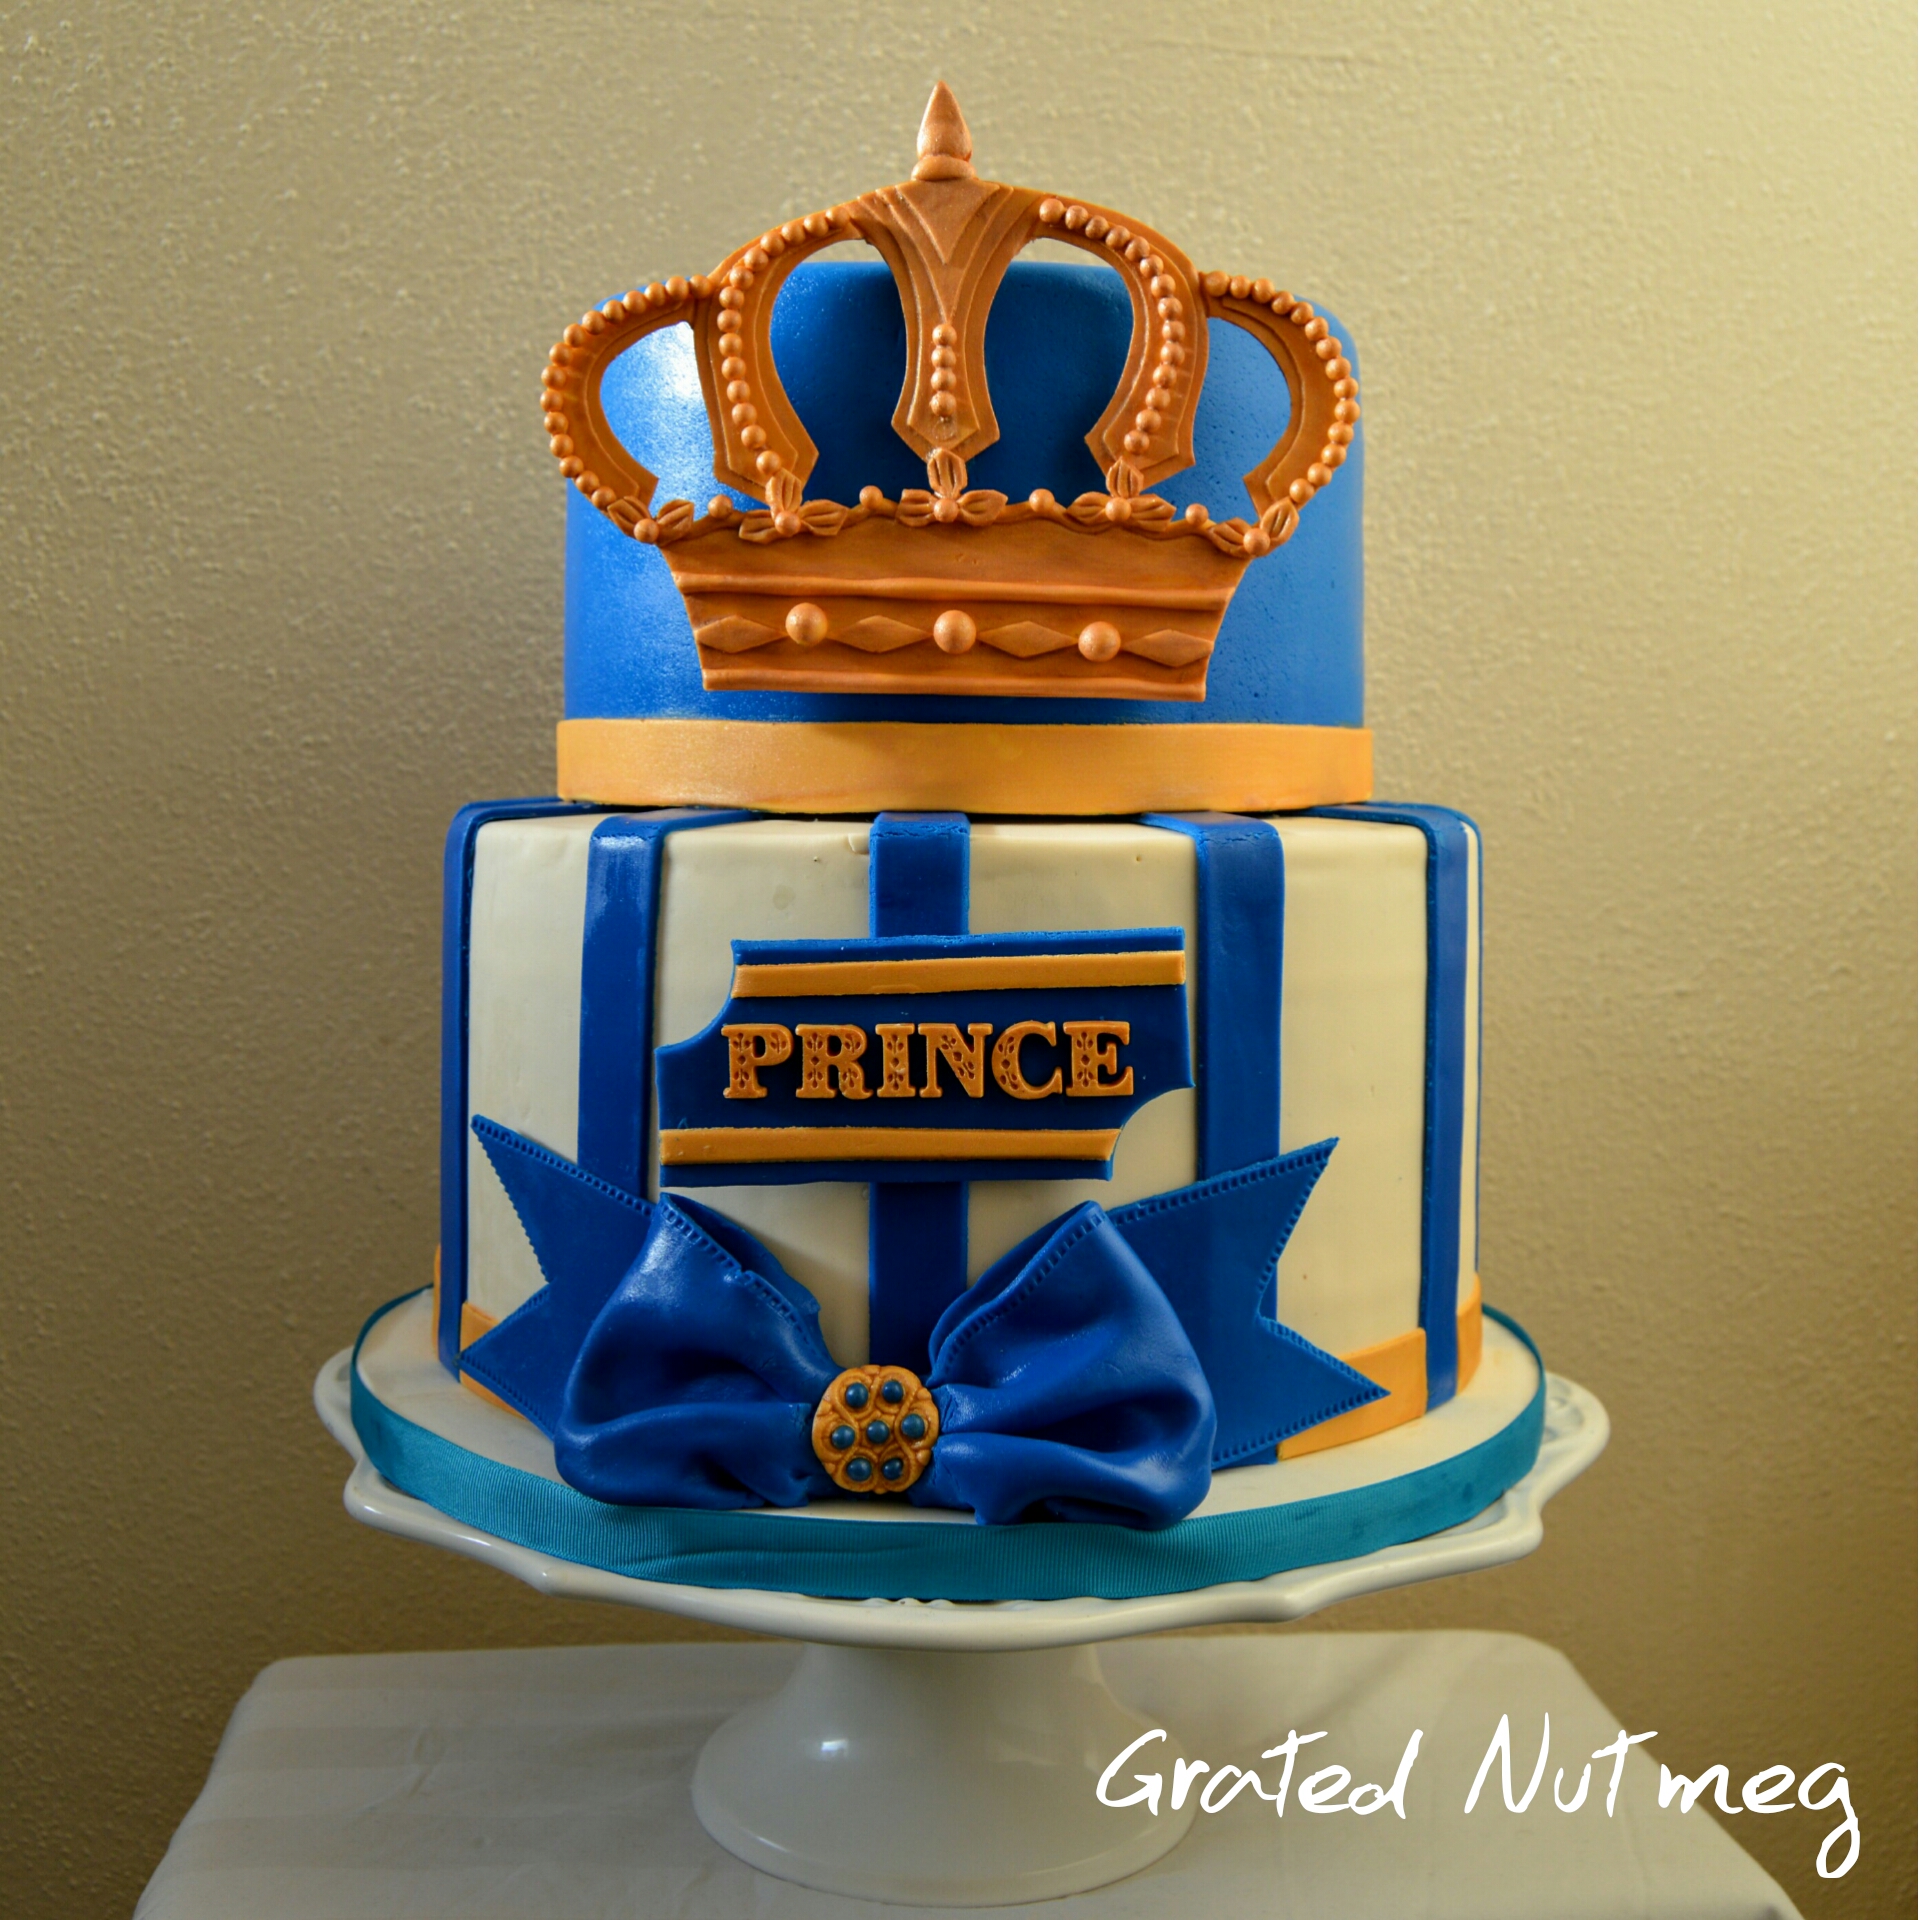 The Making of a Gold and Royal Blue Prince Cake